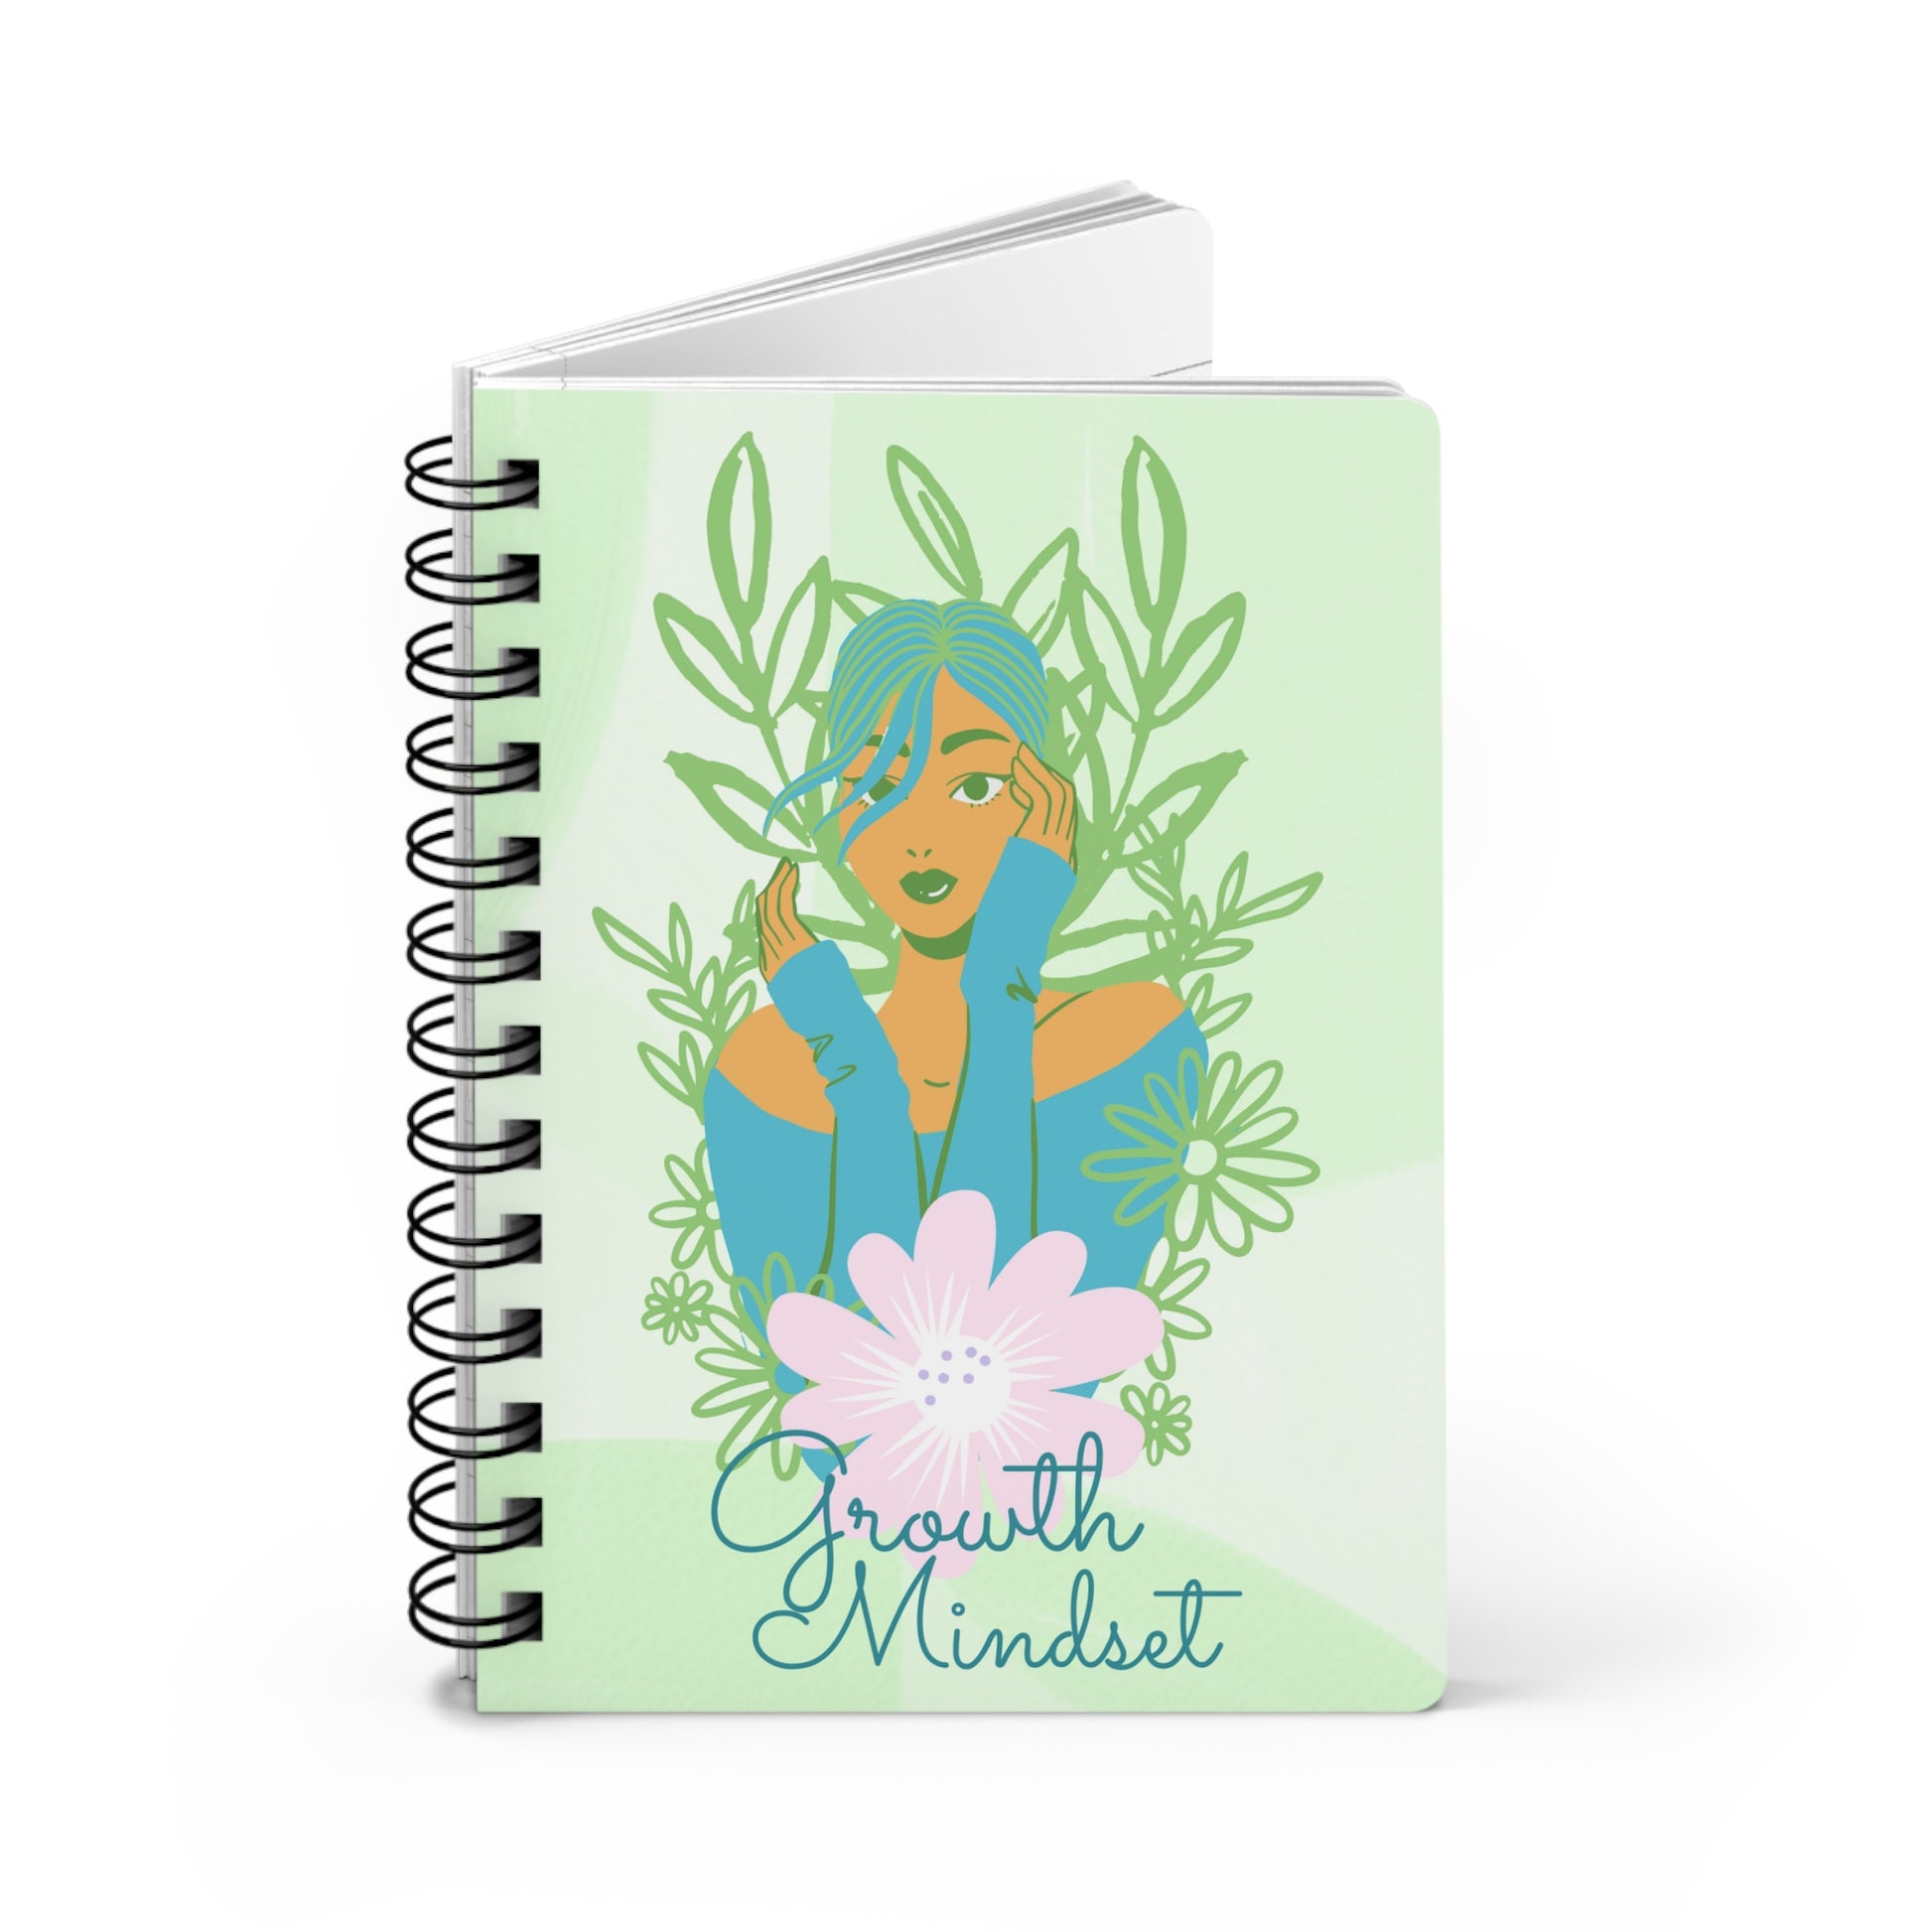 A green spiral notebook with the words "Growth Mindset" Inspirational Journal for Success and Self Improvement on it, serving as a reflective journal for emotional intelligence and growth mindset.